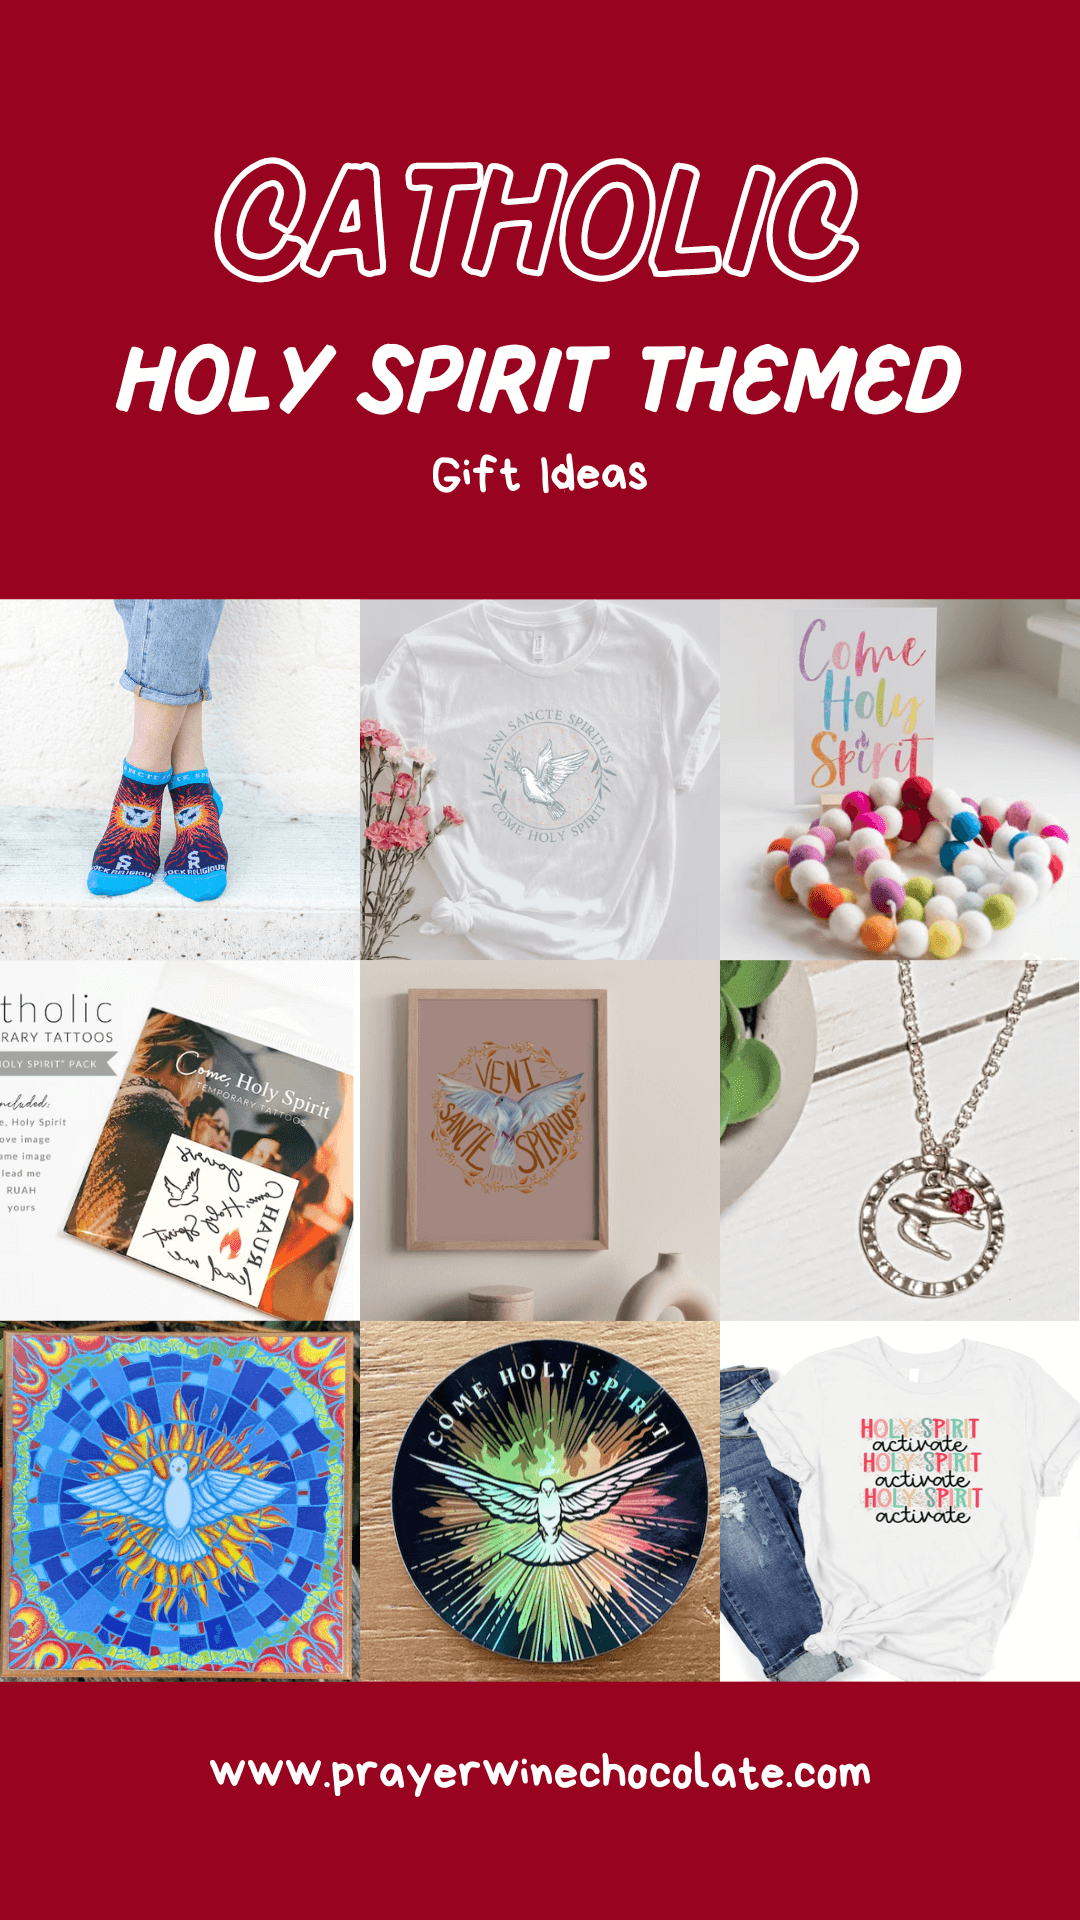 Collage of more gifts listed in the post.